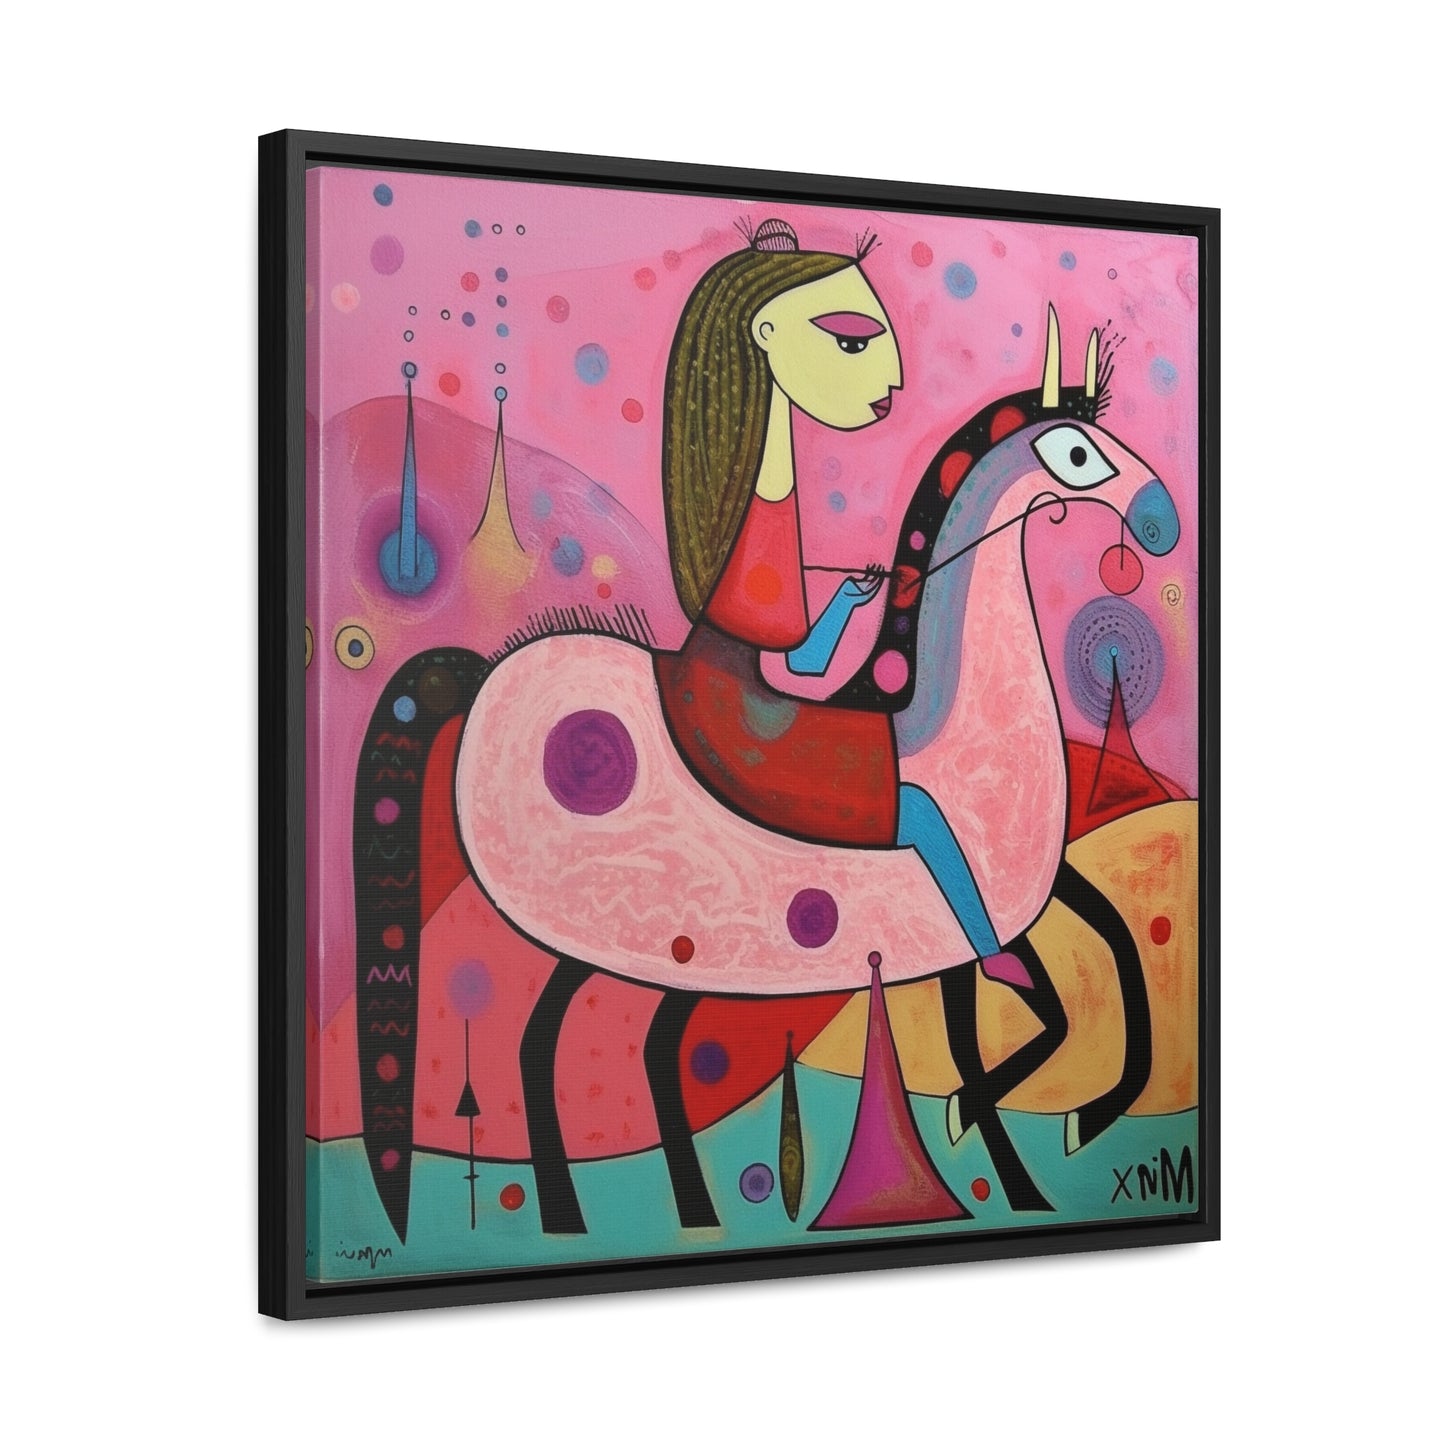 The Dreams of the Child 57, Gallery Canvas Wraps, Square Frame